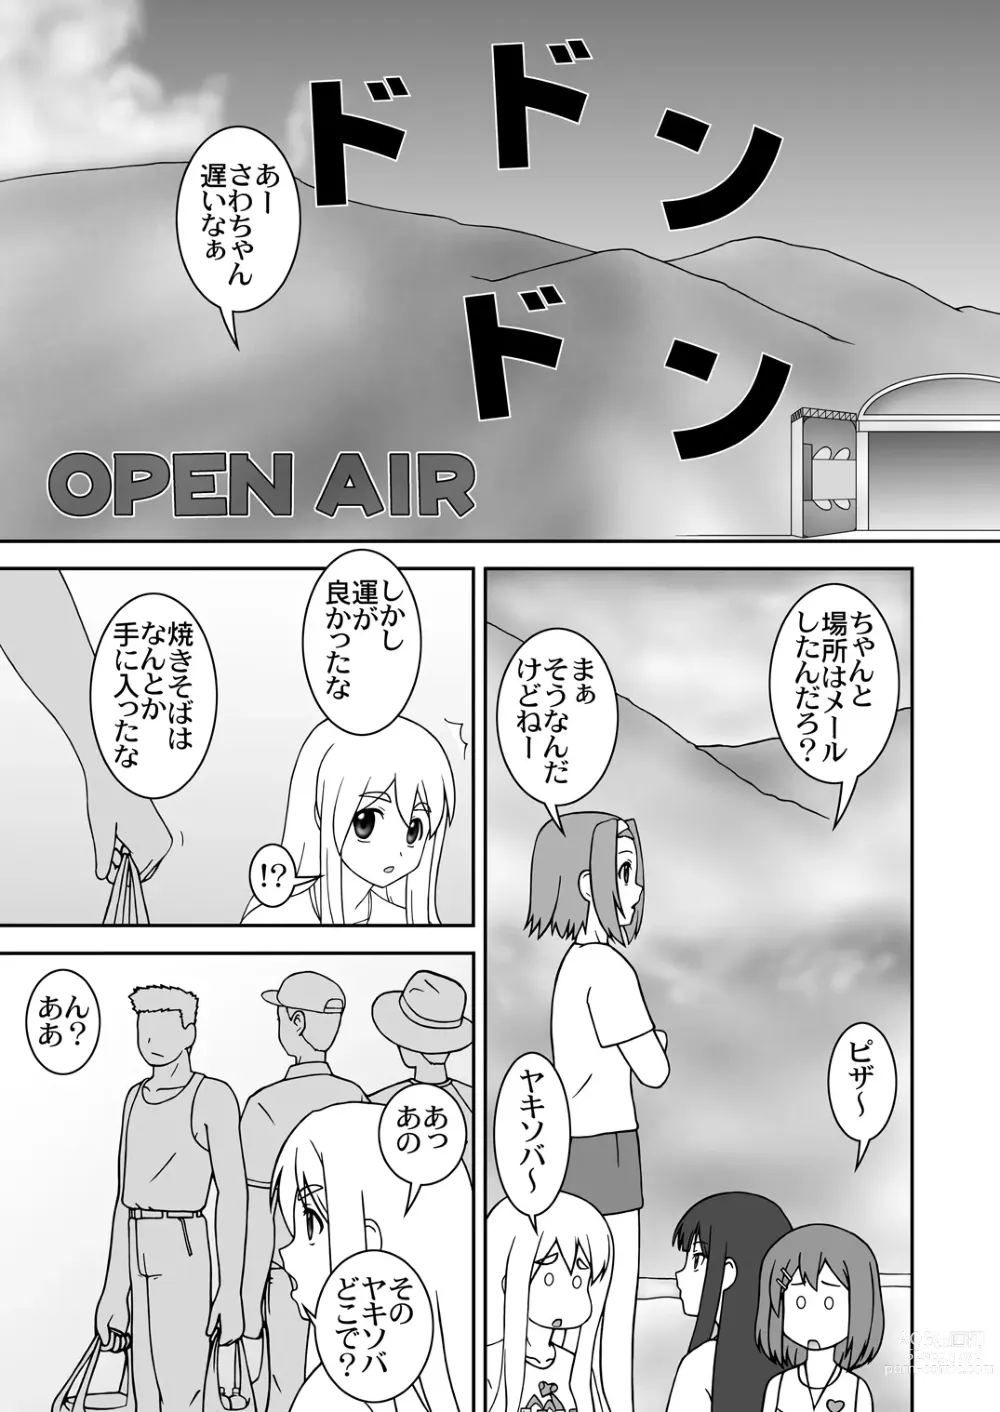 Page 2 of doujinshi OPEN AIR